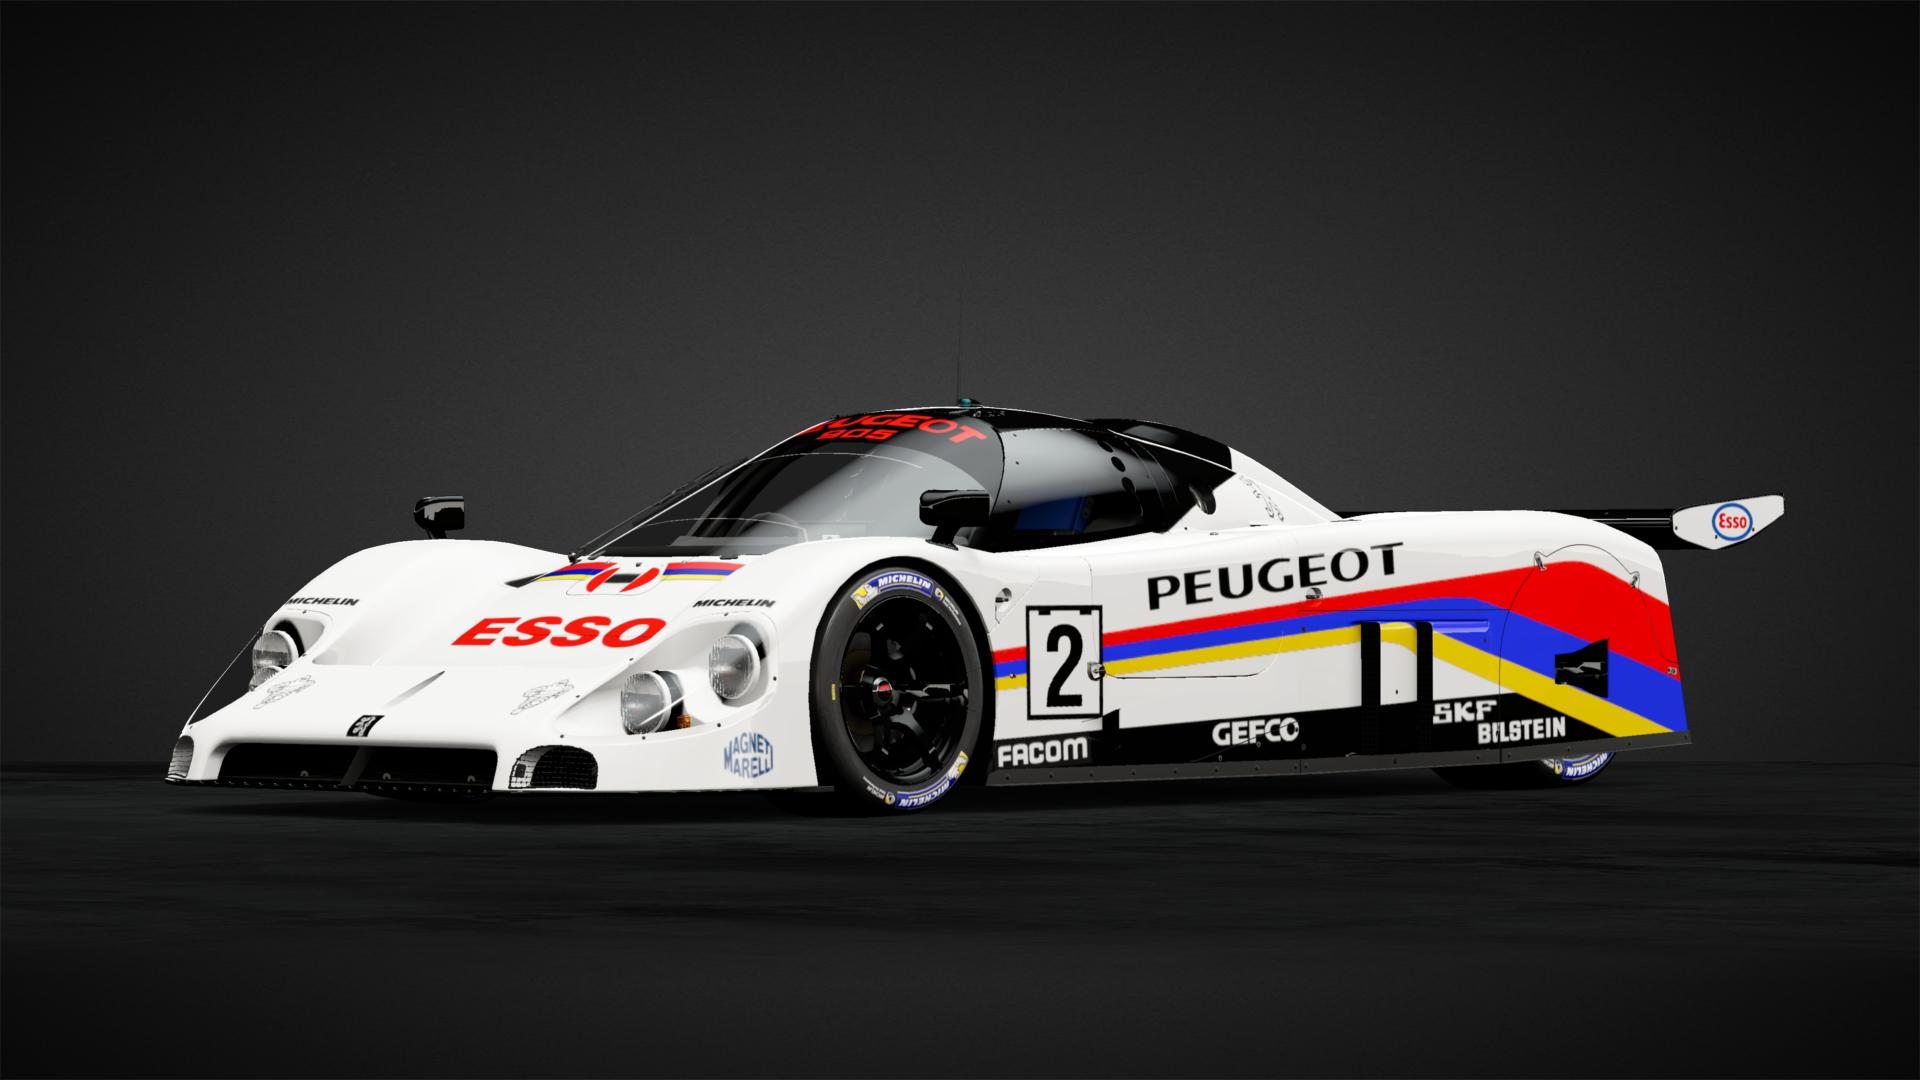 PEUGEOT 905 EVO Livery by xCOLOMB1ANx. Community. Gran Turismo Sport